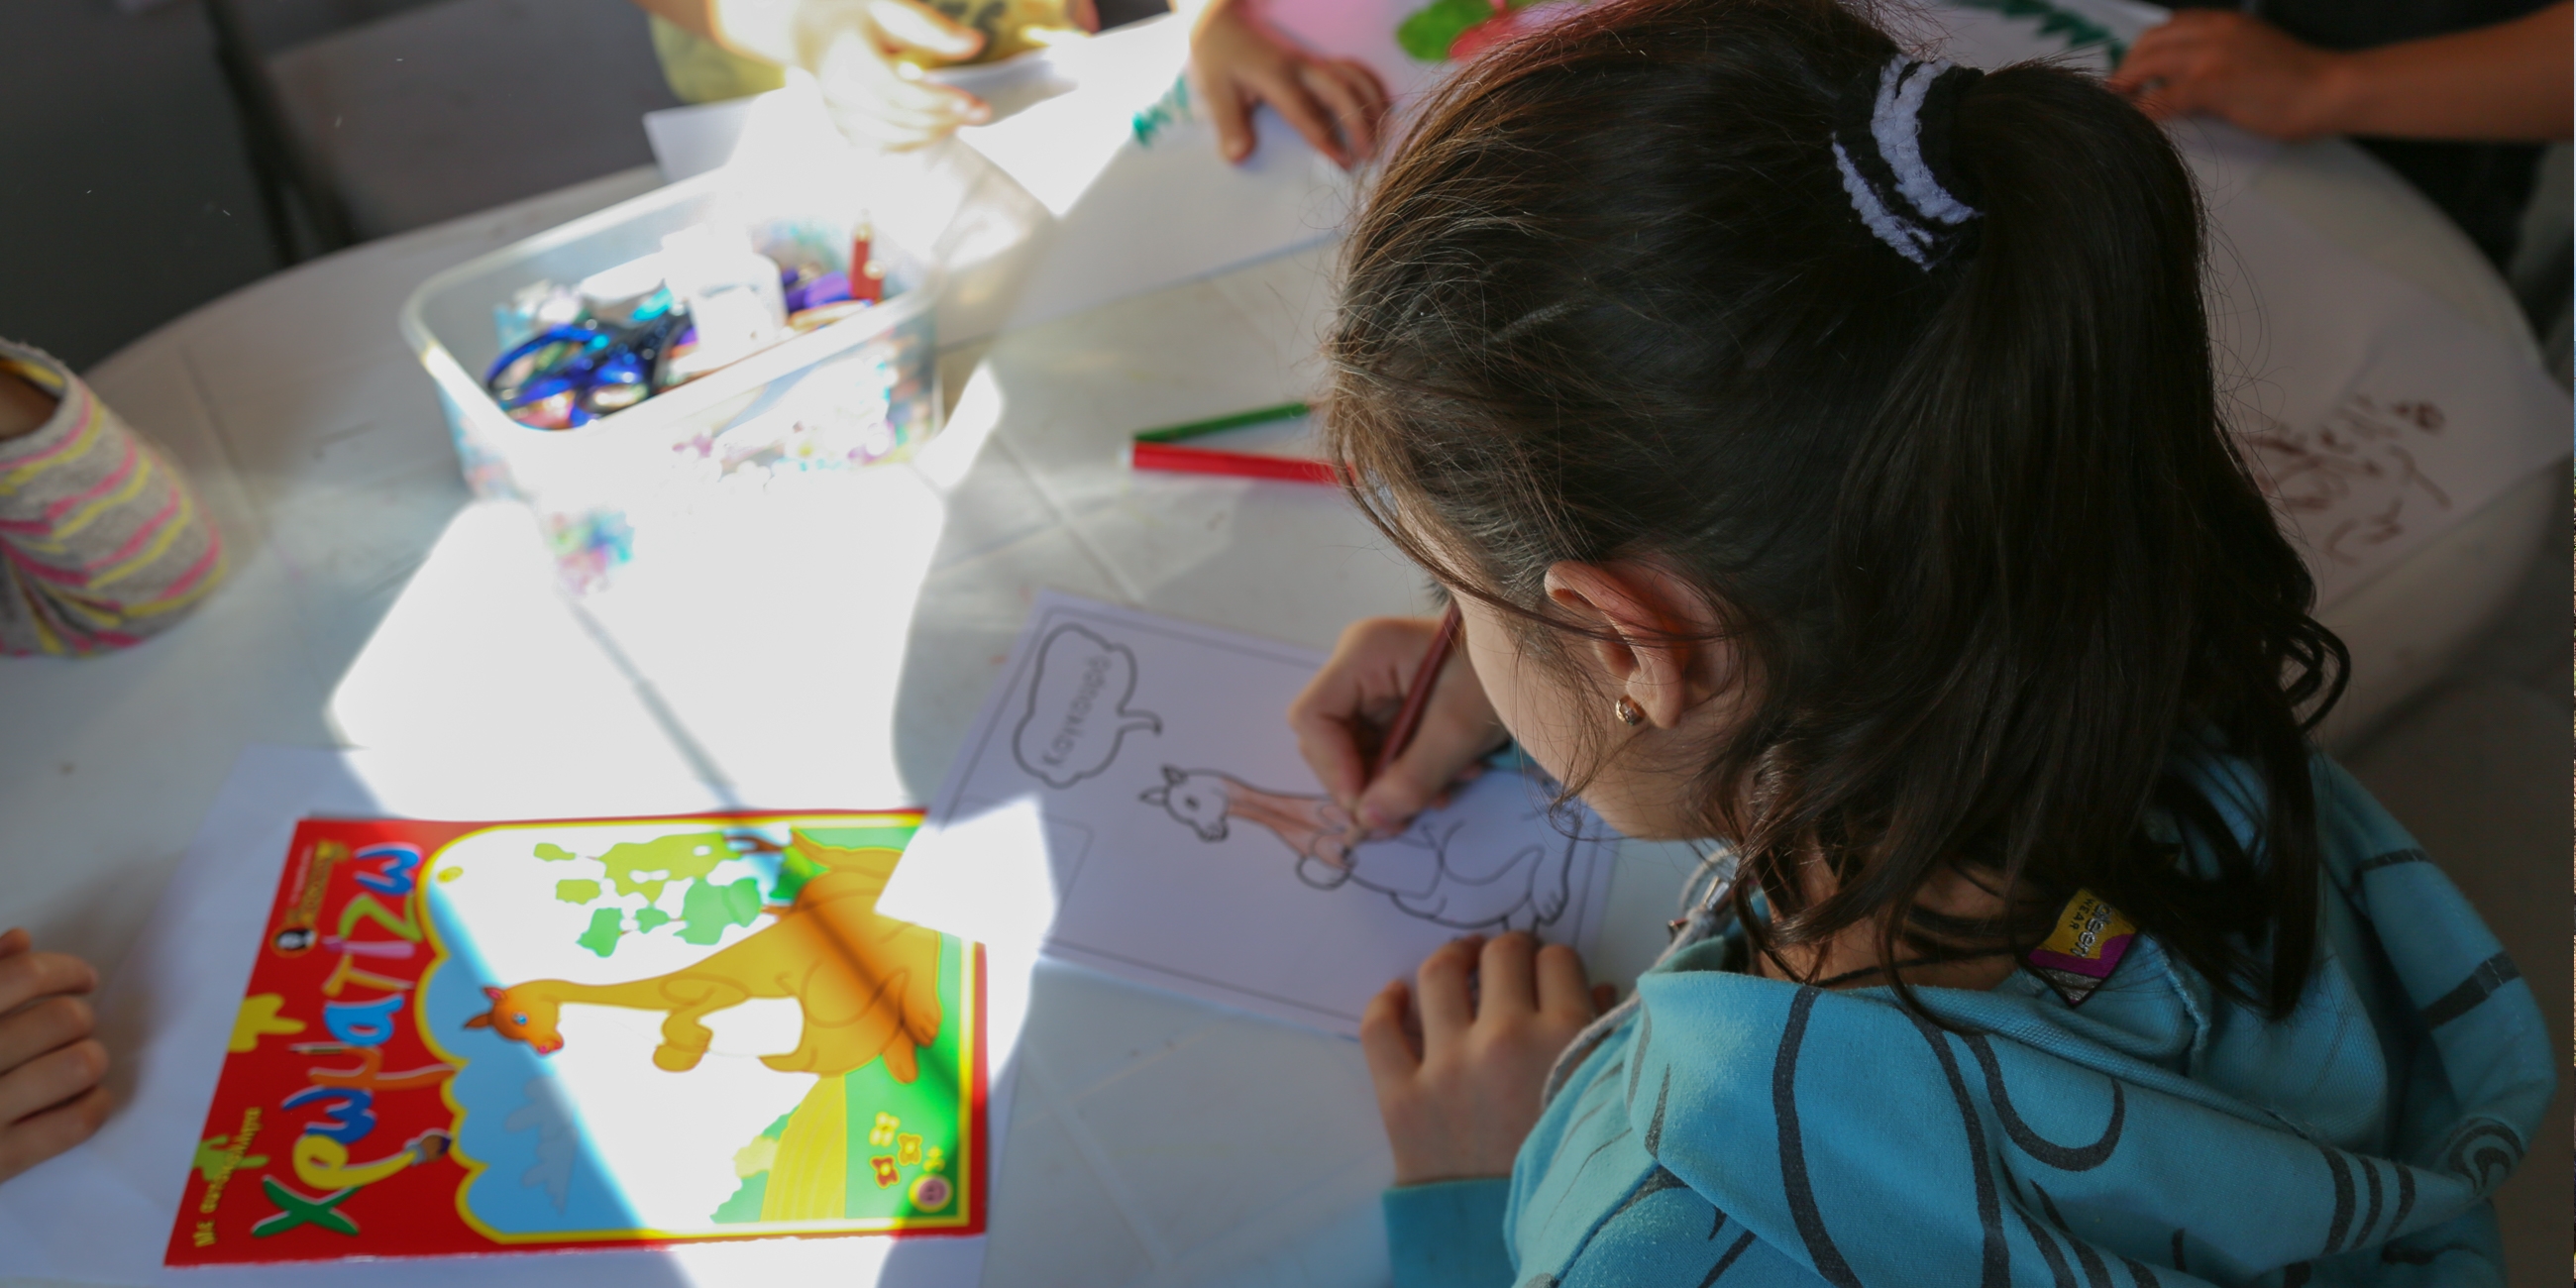 Rula*, 7, draws pictures at Save the Children’s child-friendly space in Kara Tepe. She and her family fled from Syria to Turkey, from where they got on a rubber boat to Lesvos island, Greece. Photo credit: Simine Alam/Save the Children 2015. 